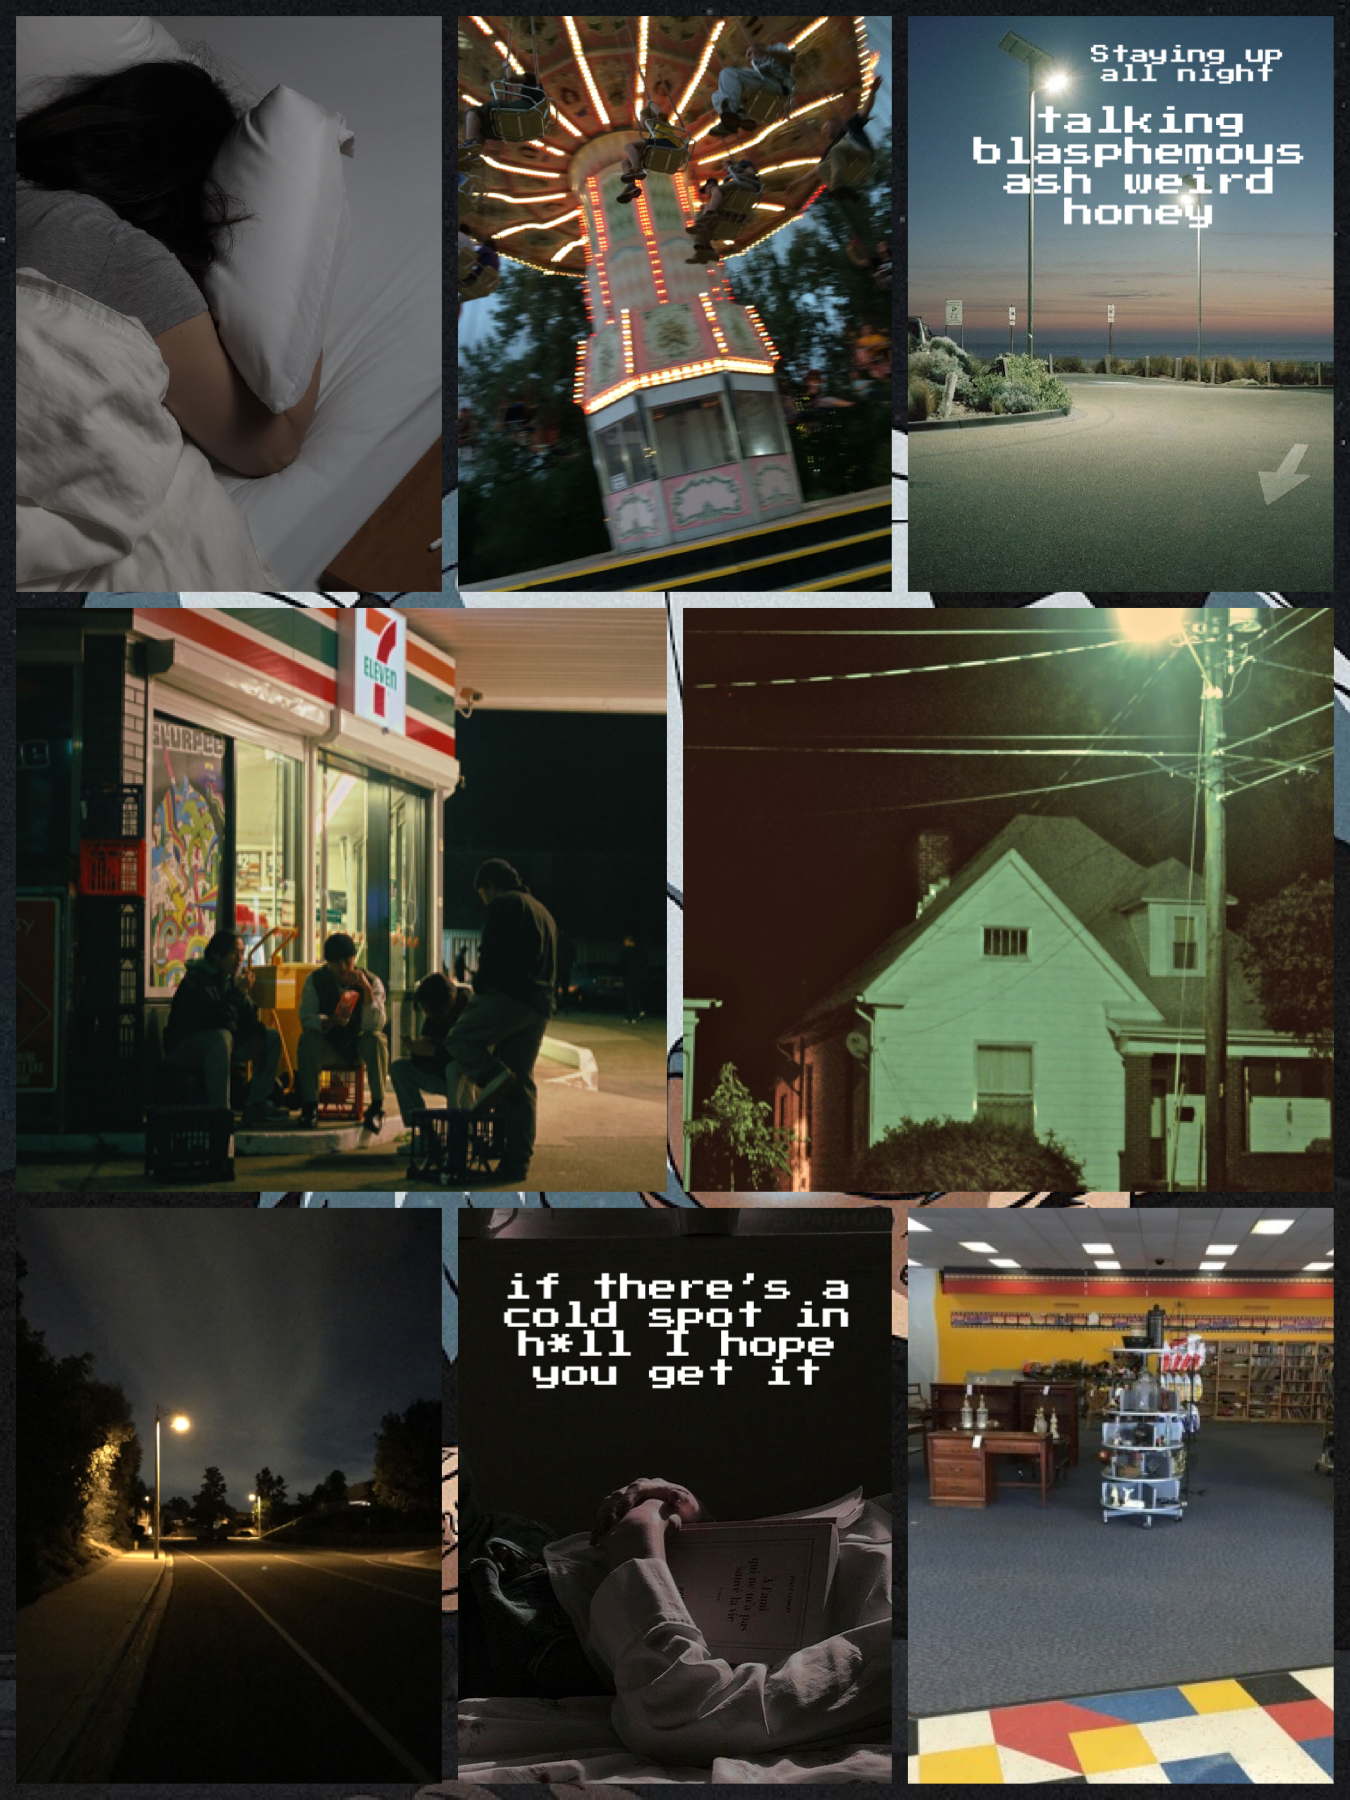 Moodboard Based on Weird Honey by Elvis Depressedly, dedicated to ToastedToasts!